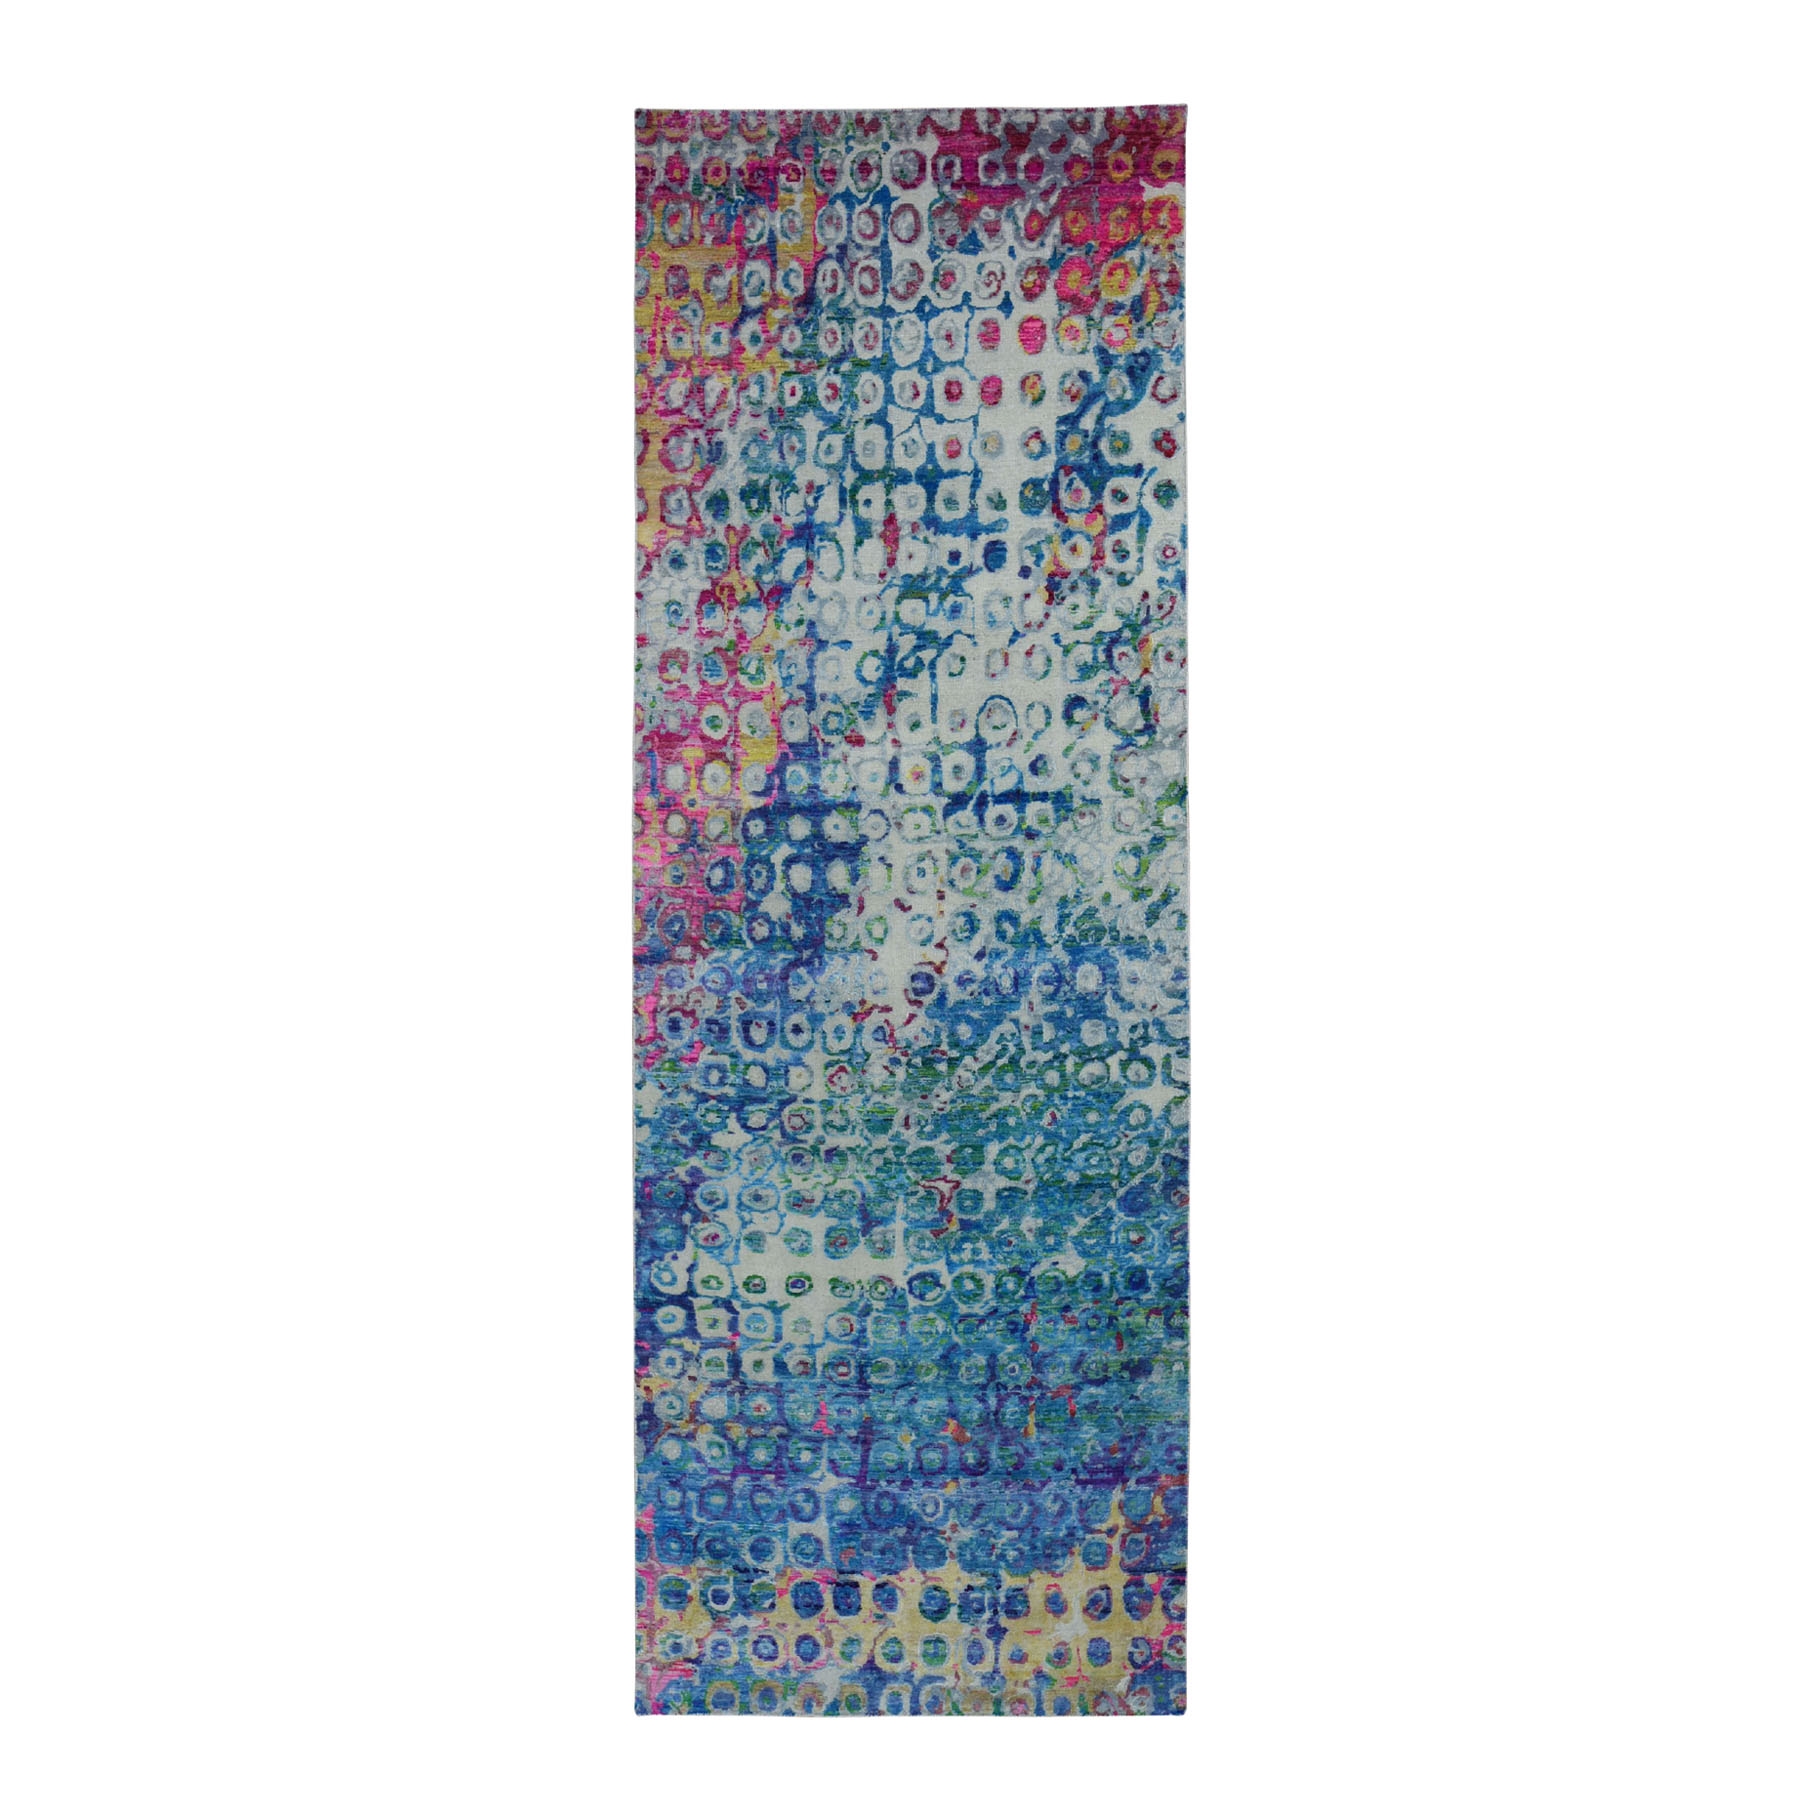 3'10"X11'10" The Peacock, Sari Silk Colorful Hand Knotted Wide Runner Oriental Rug moad909a